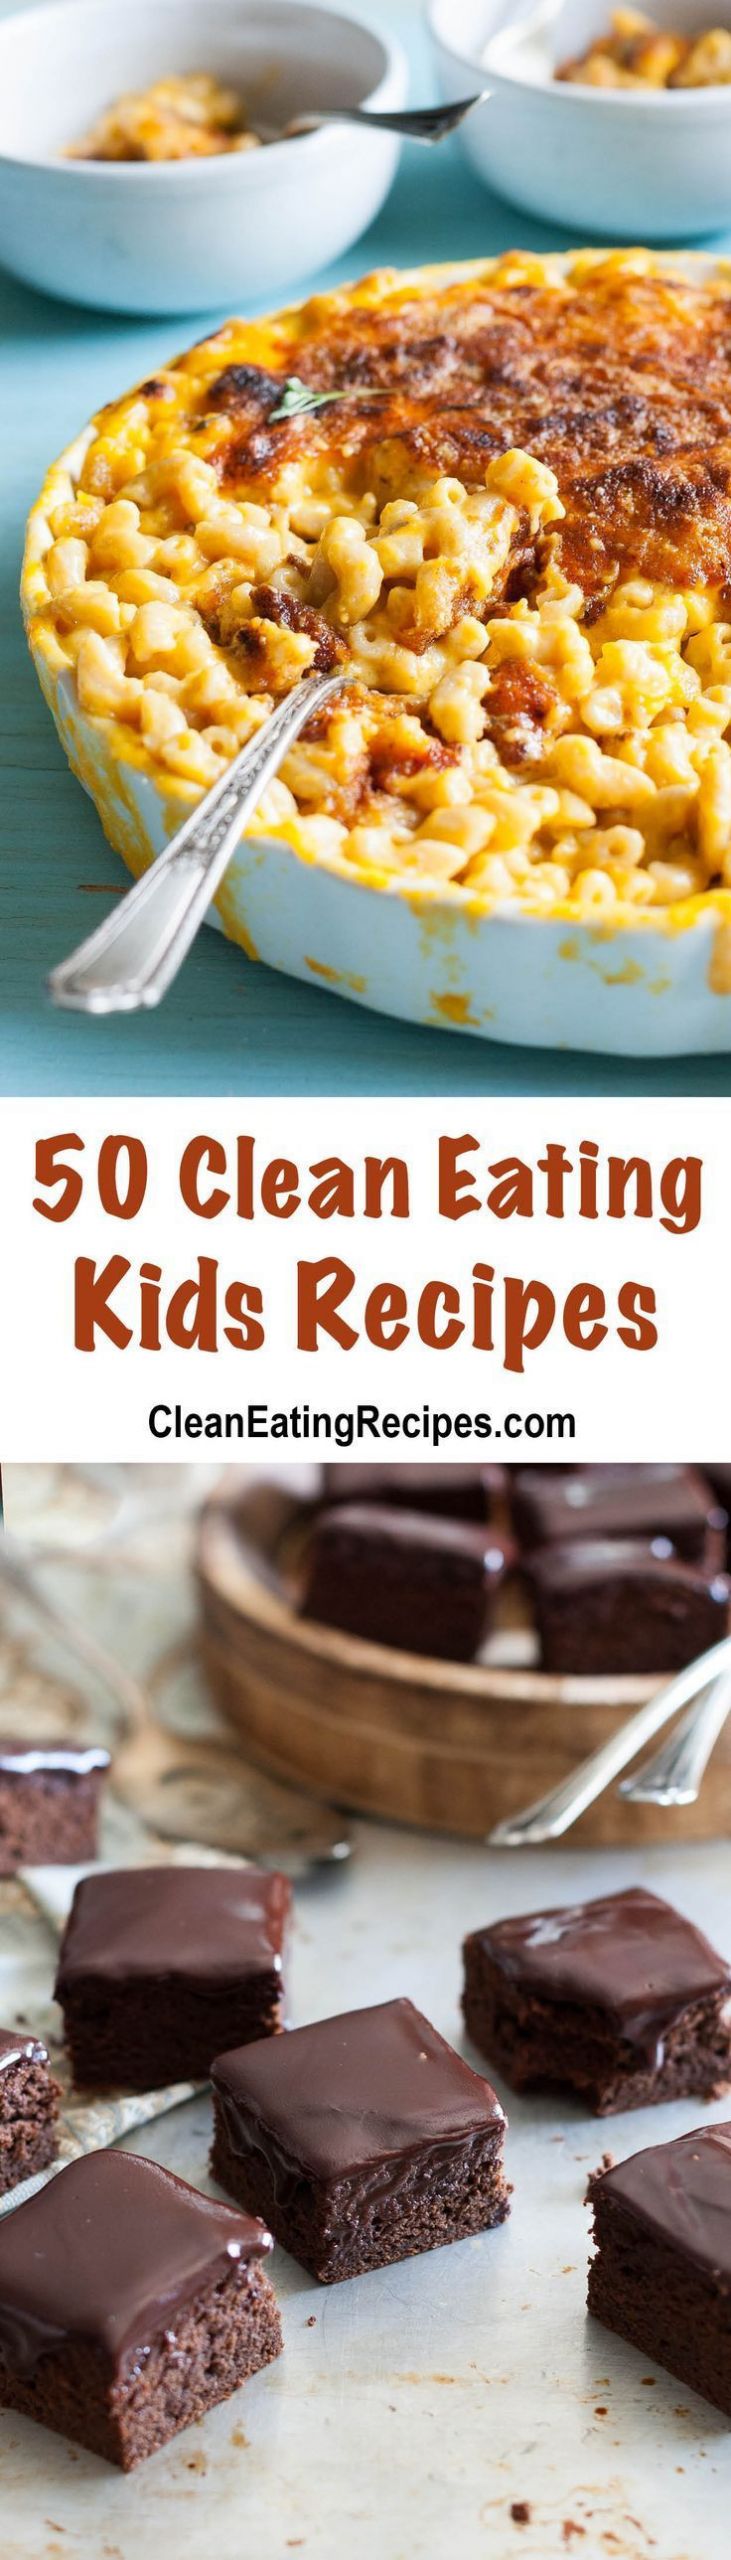 Clean Eating Recipes For Kids
 4824 best Family Food & Travel images on Pinterest